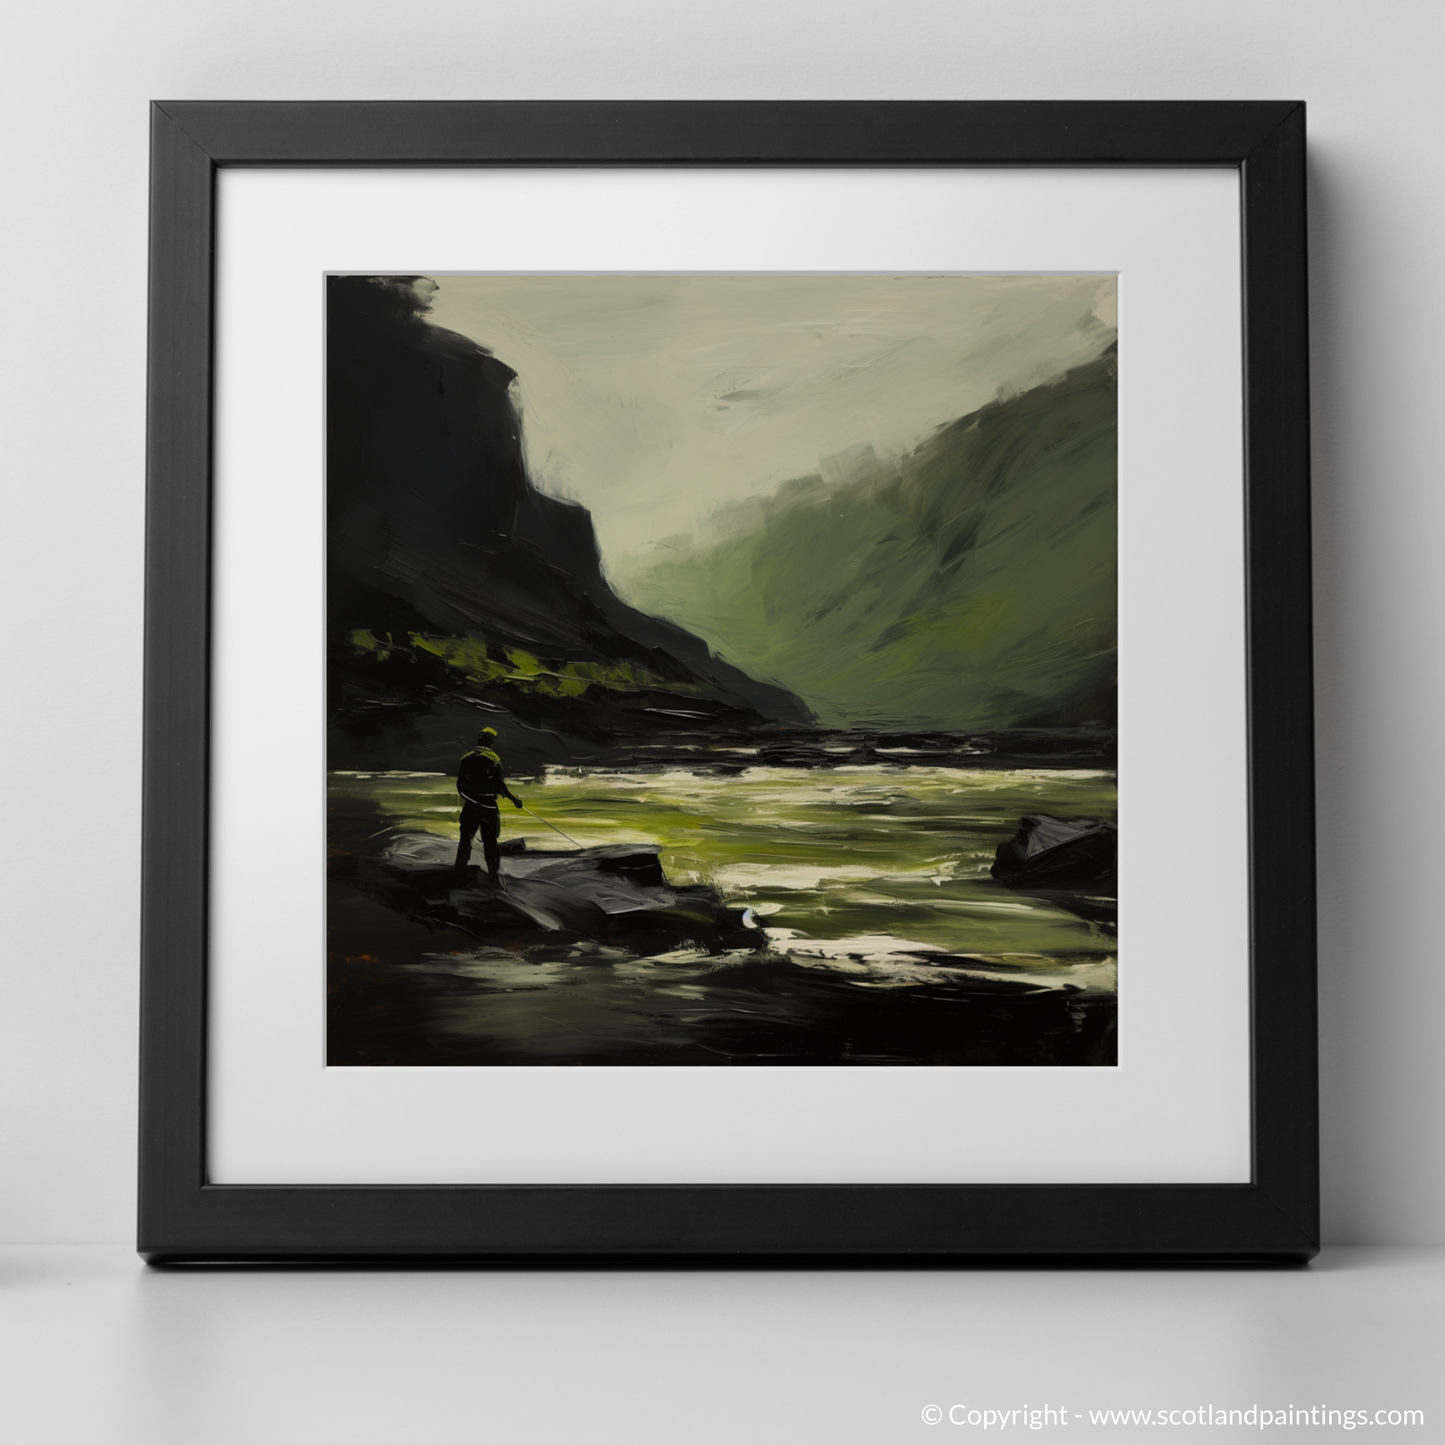 Art Print of A man fishing on a Scottish River with a black frame